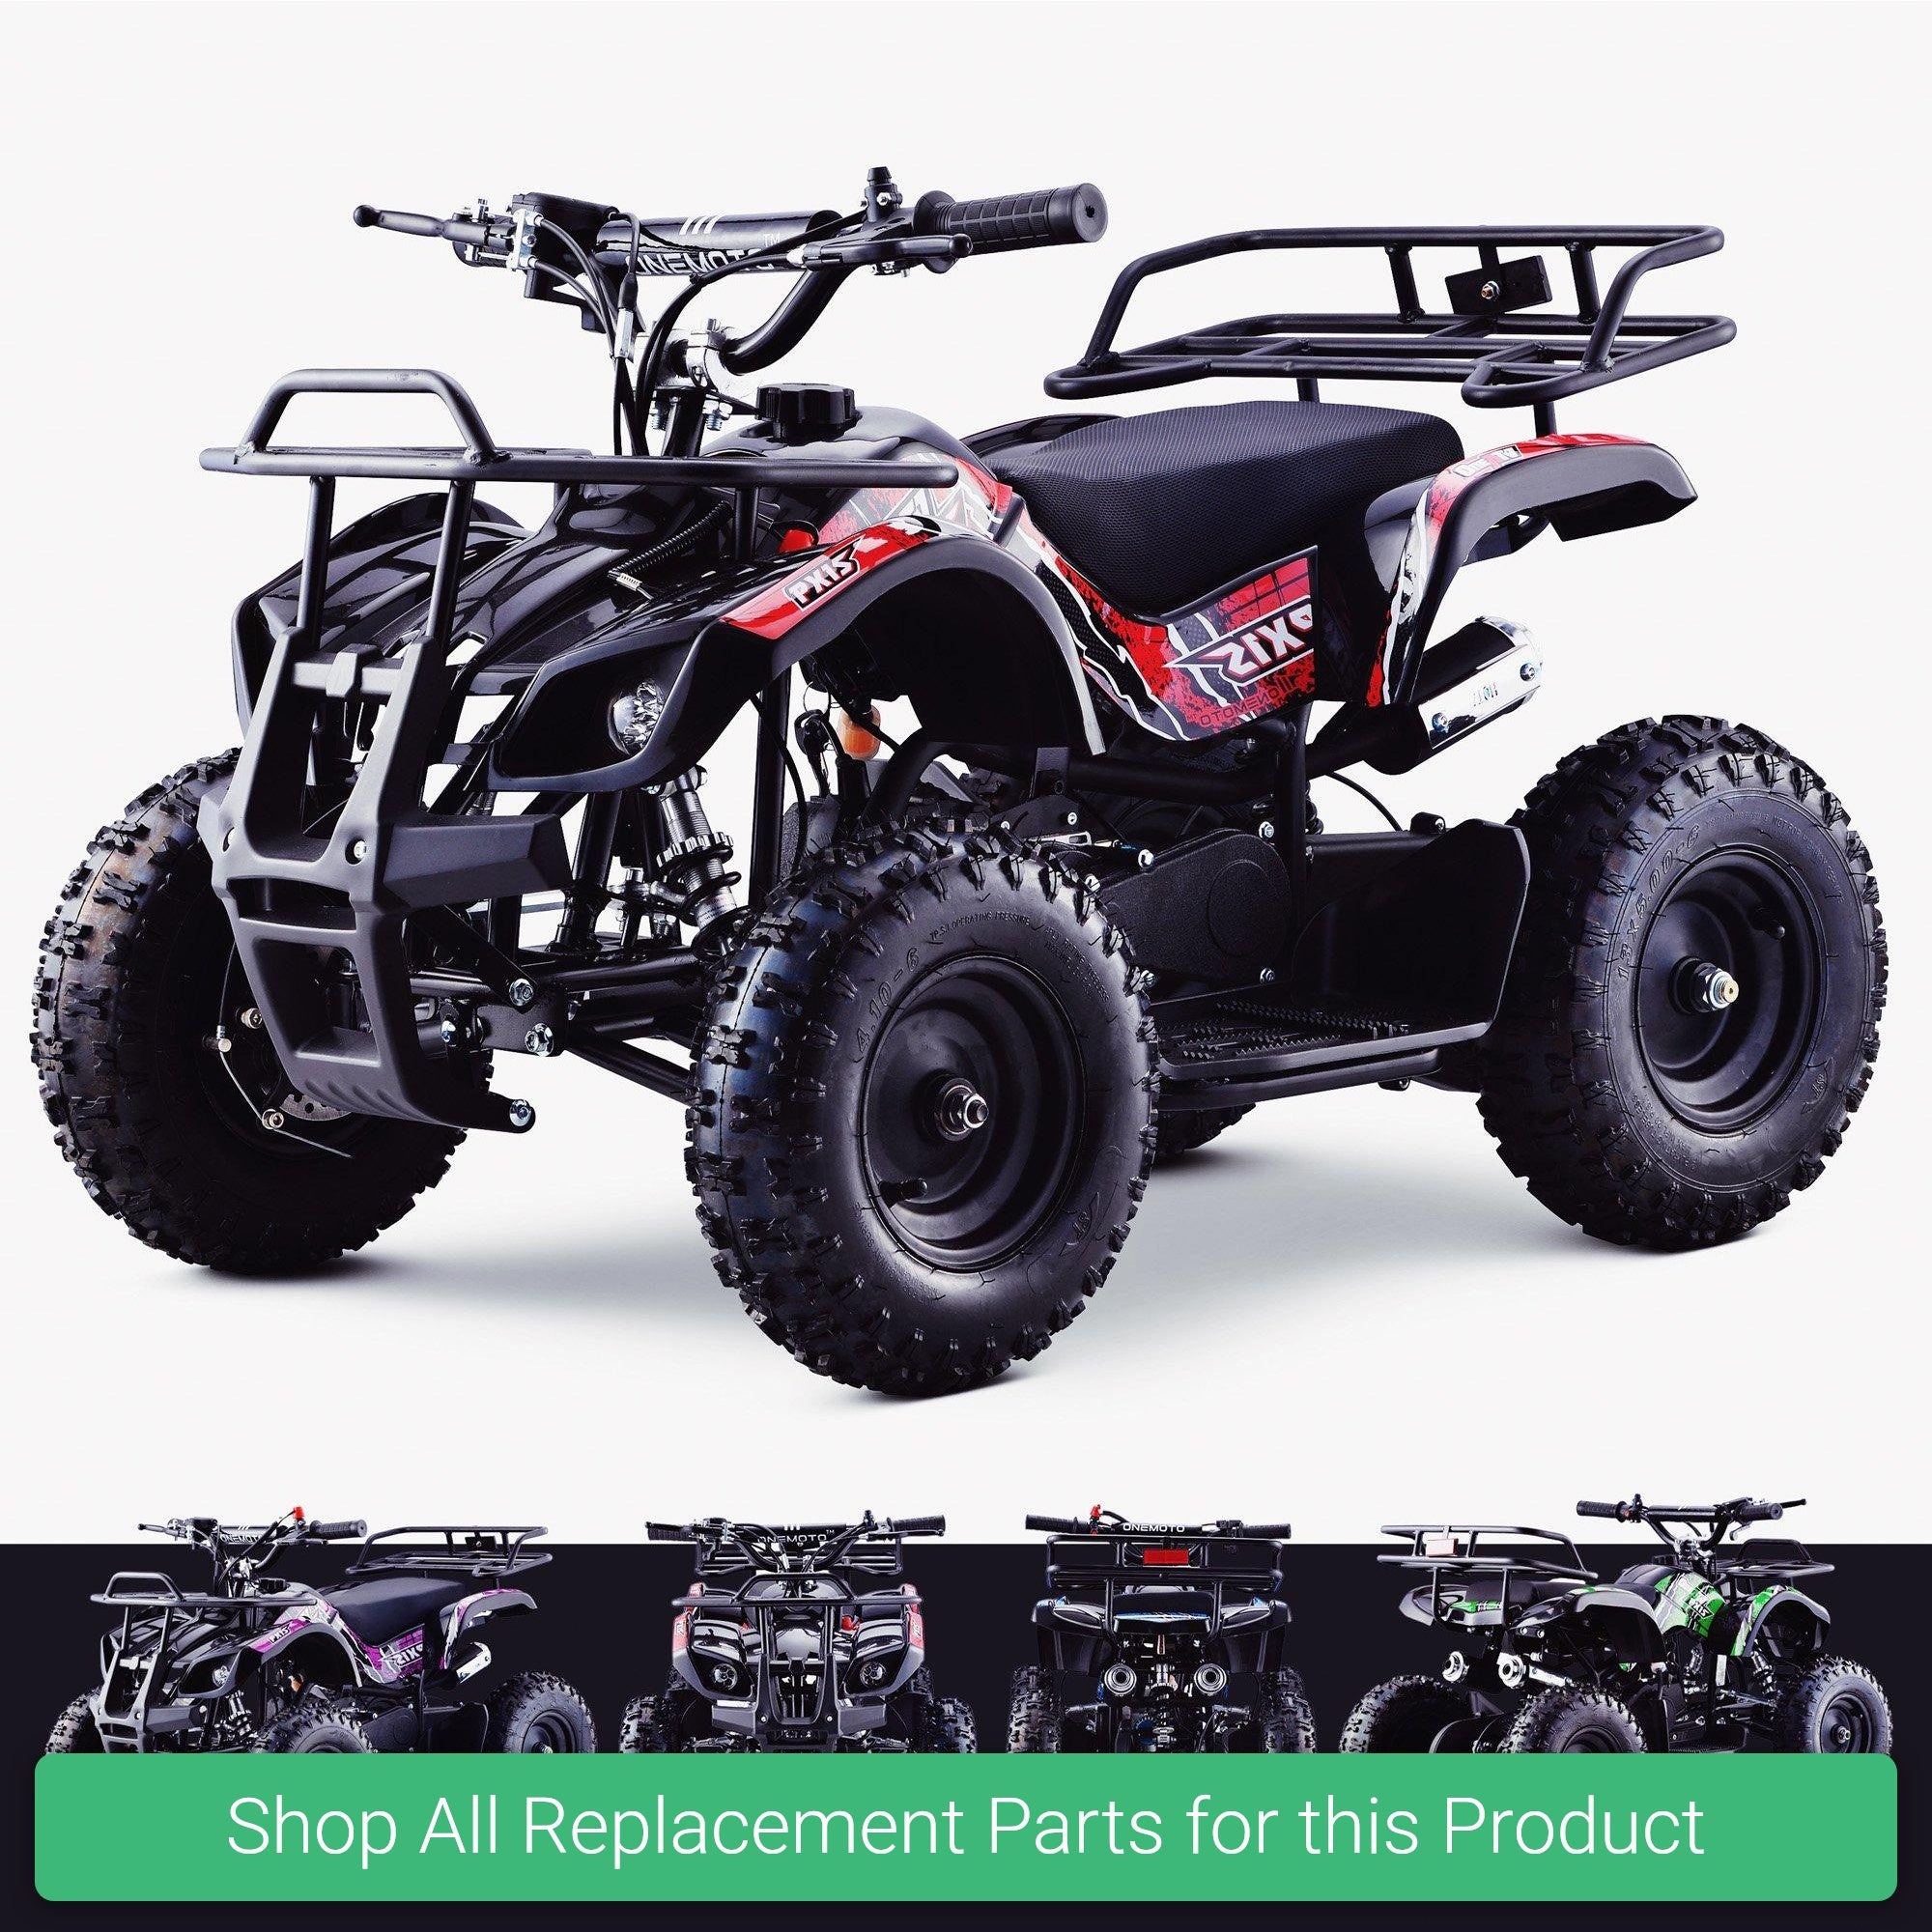 Replacement Parts and Spares for Kids 49cc Quad 2020 Design - OneATV™ | PX1S - OneATV-PX1S-VARI - ATV-7-